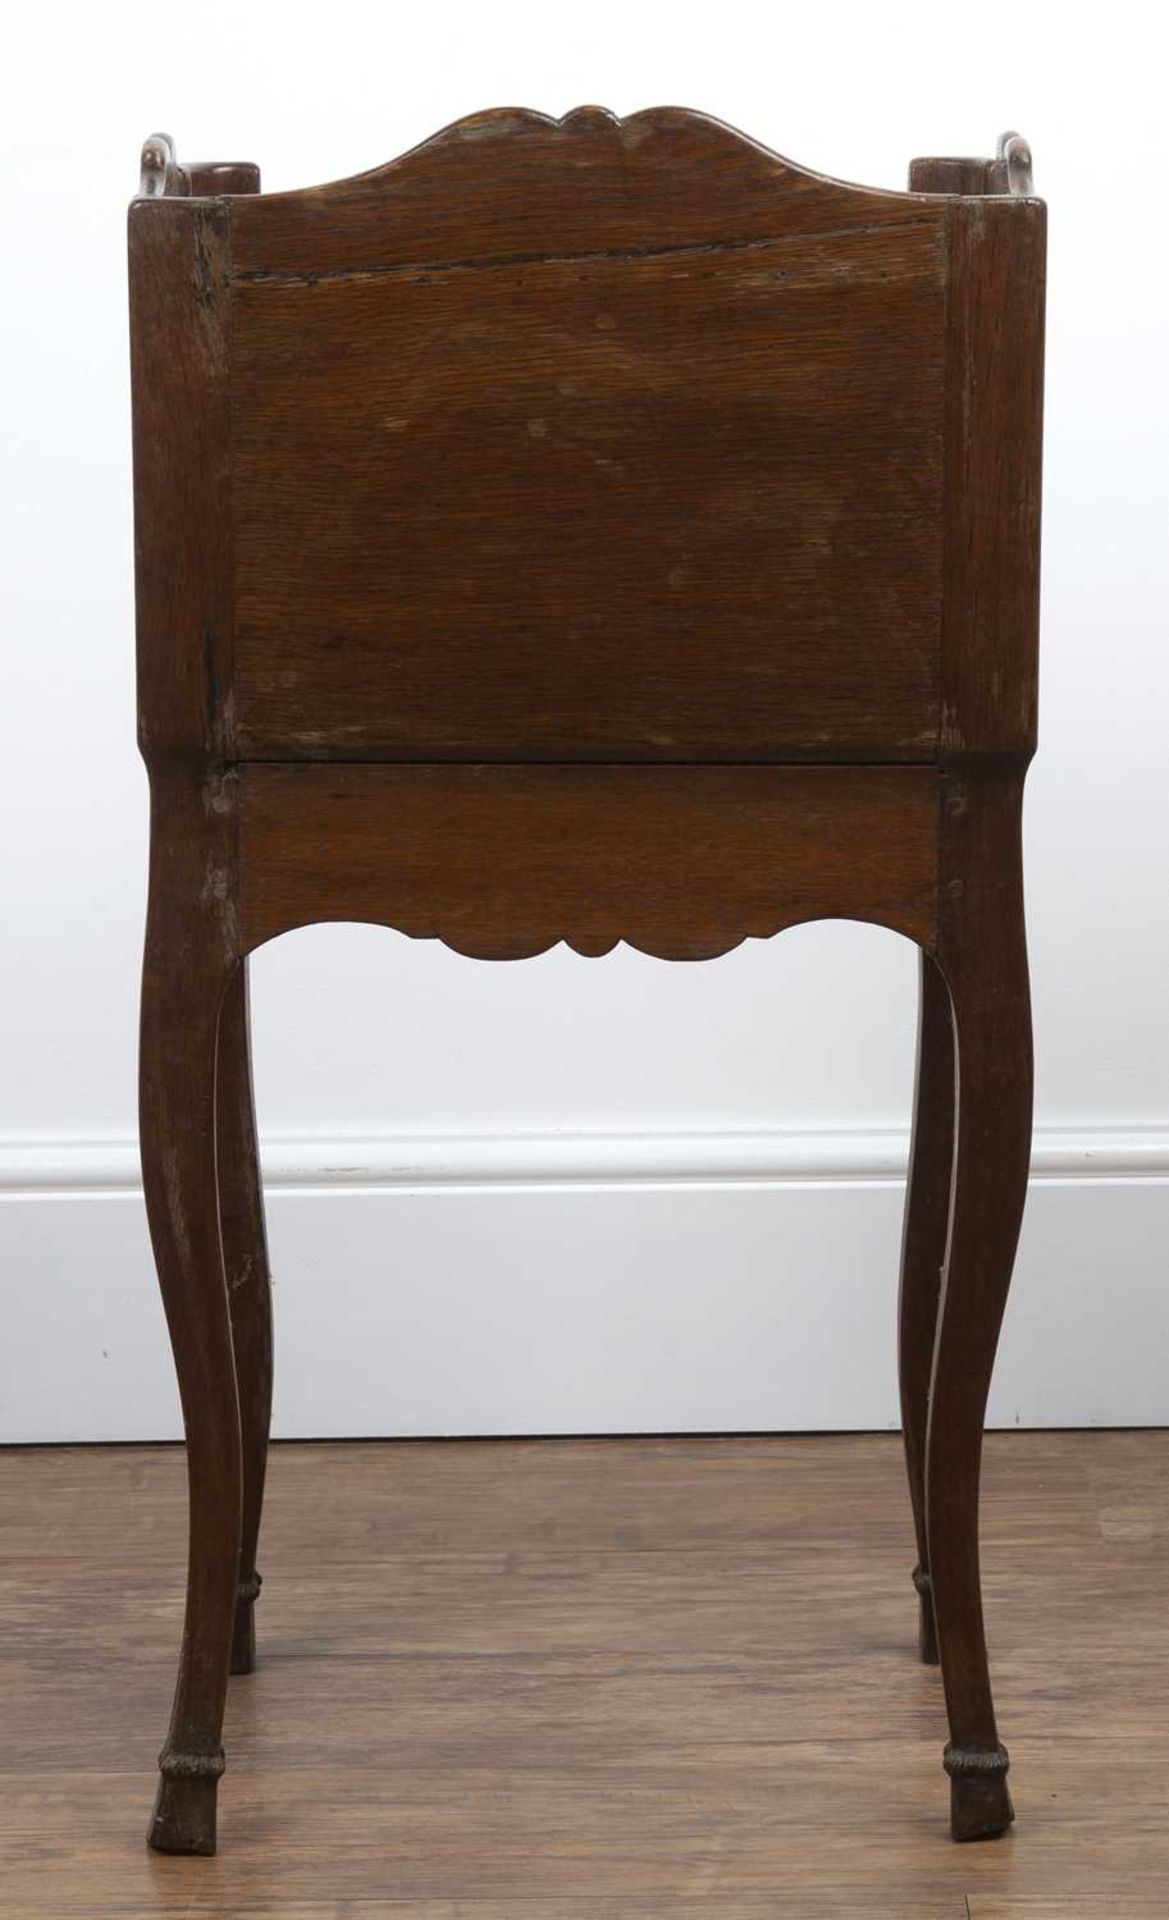 Oak bedside table or side table French Provincial, 19th Century, with shaped galleried top, - Image 4 of 6